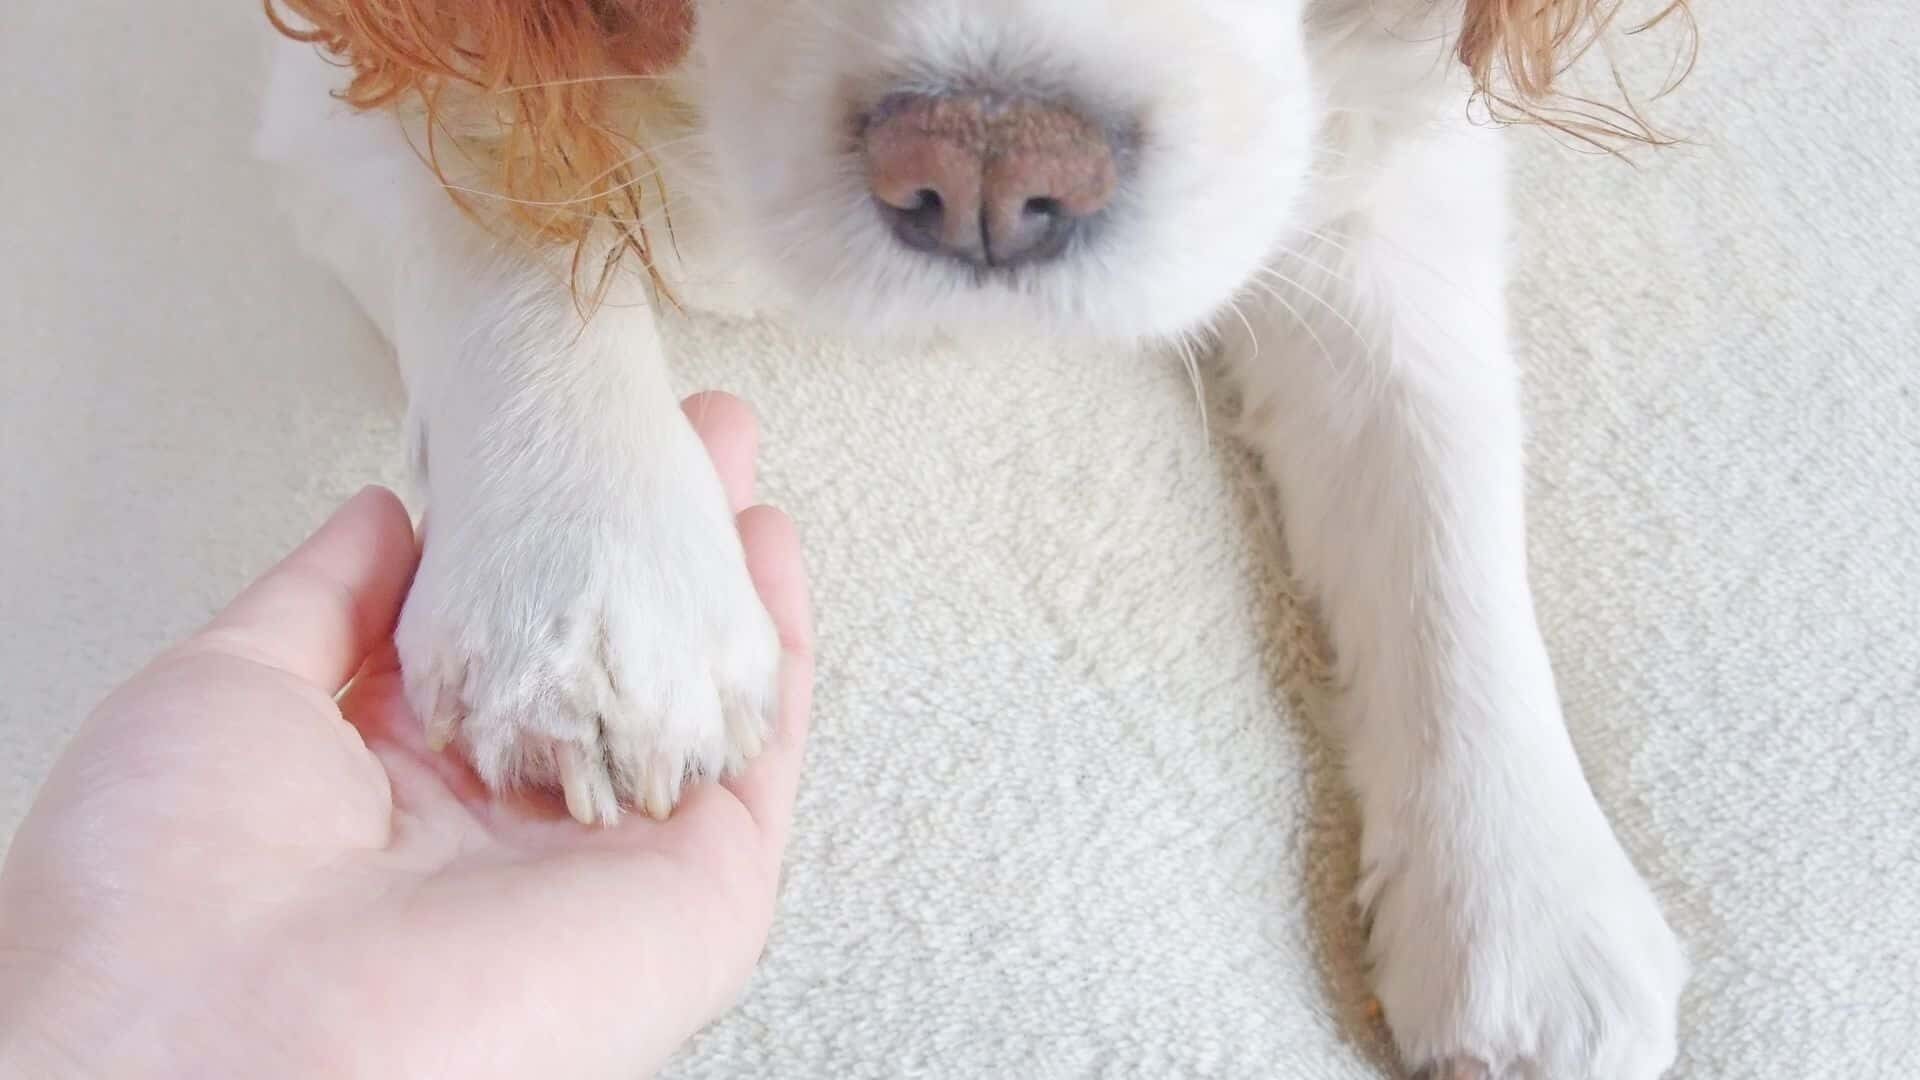 Dogs licking paws after grooming